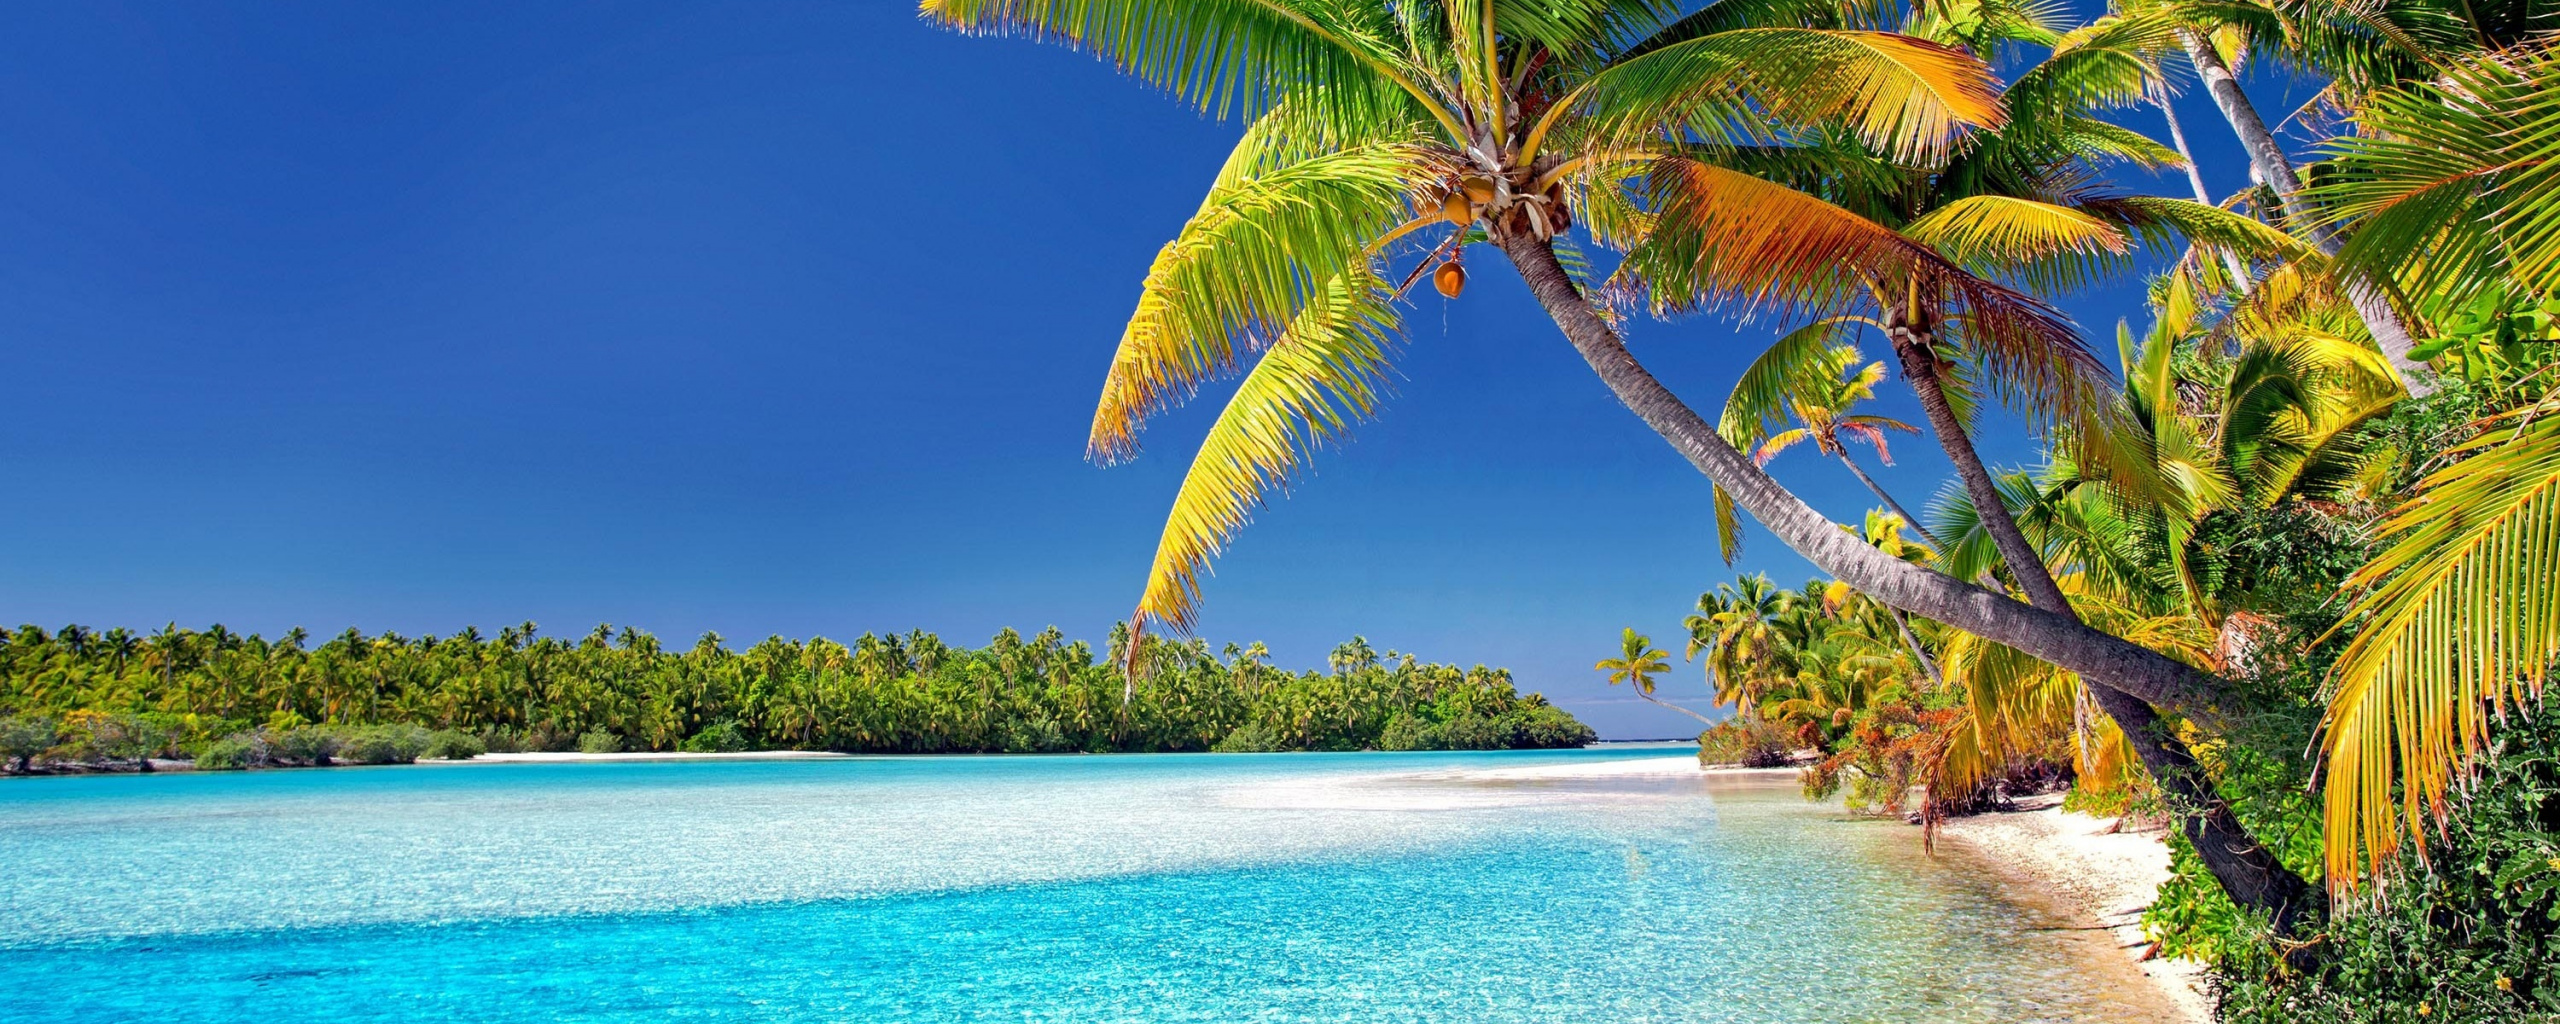 Cook Islands, Beach, Sunny Day, Palm Trees, Wallpaper - Cook Islands - HD Wallpaper 